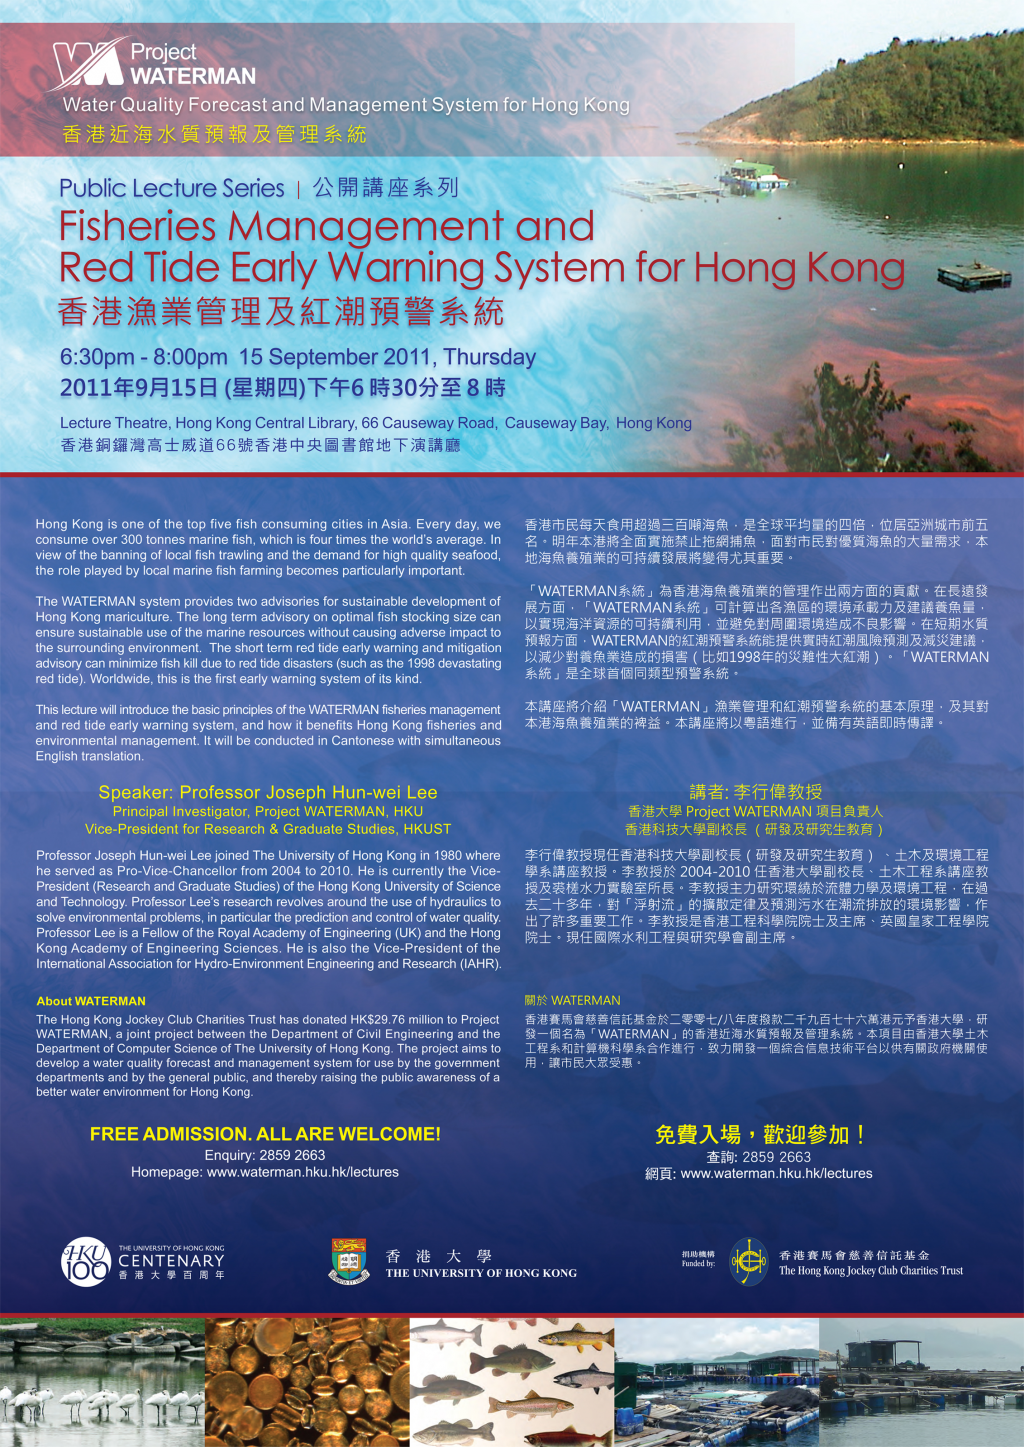 Project WATERMAN Public Lecture on Fisheries Management and Red Tide Early Warning System  for Hong Kong